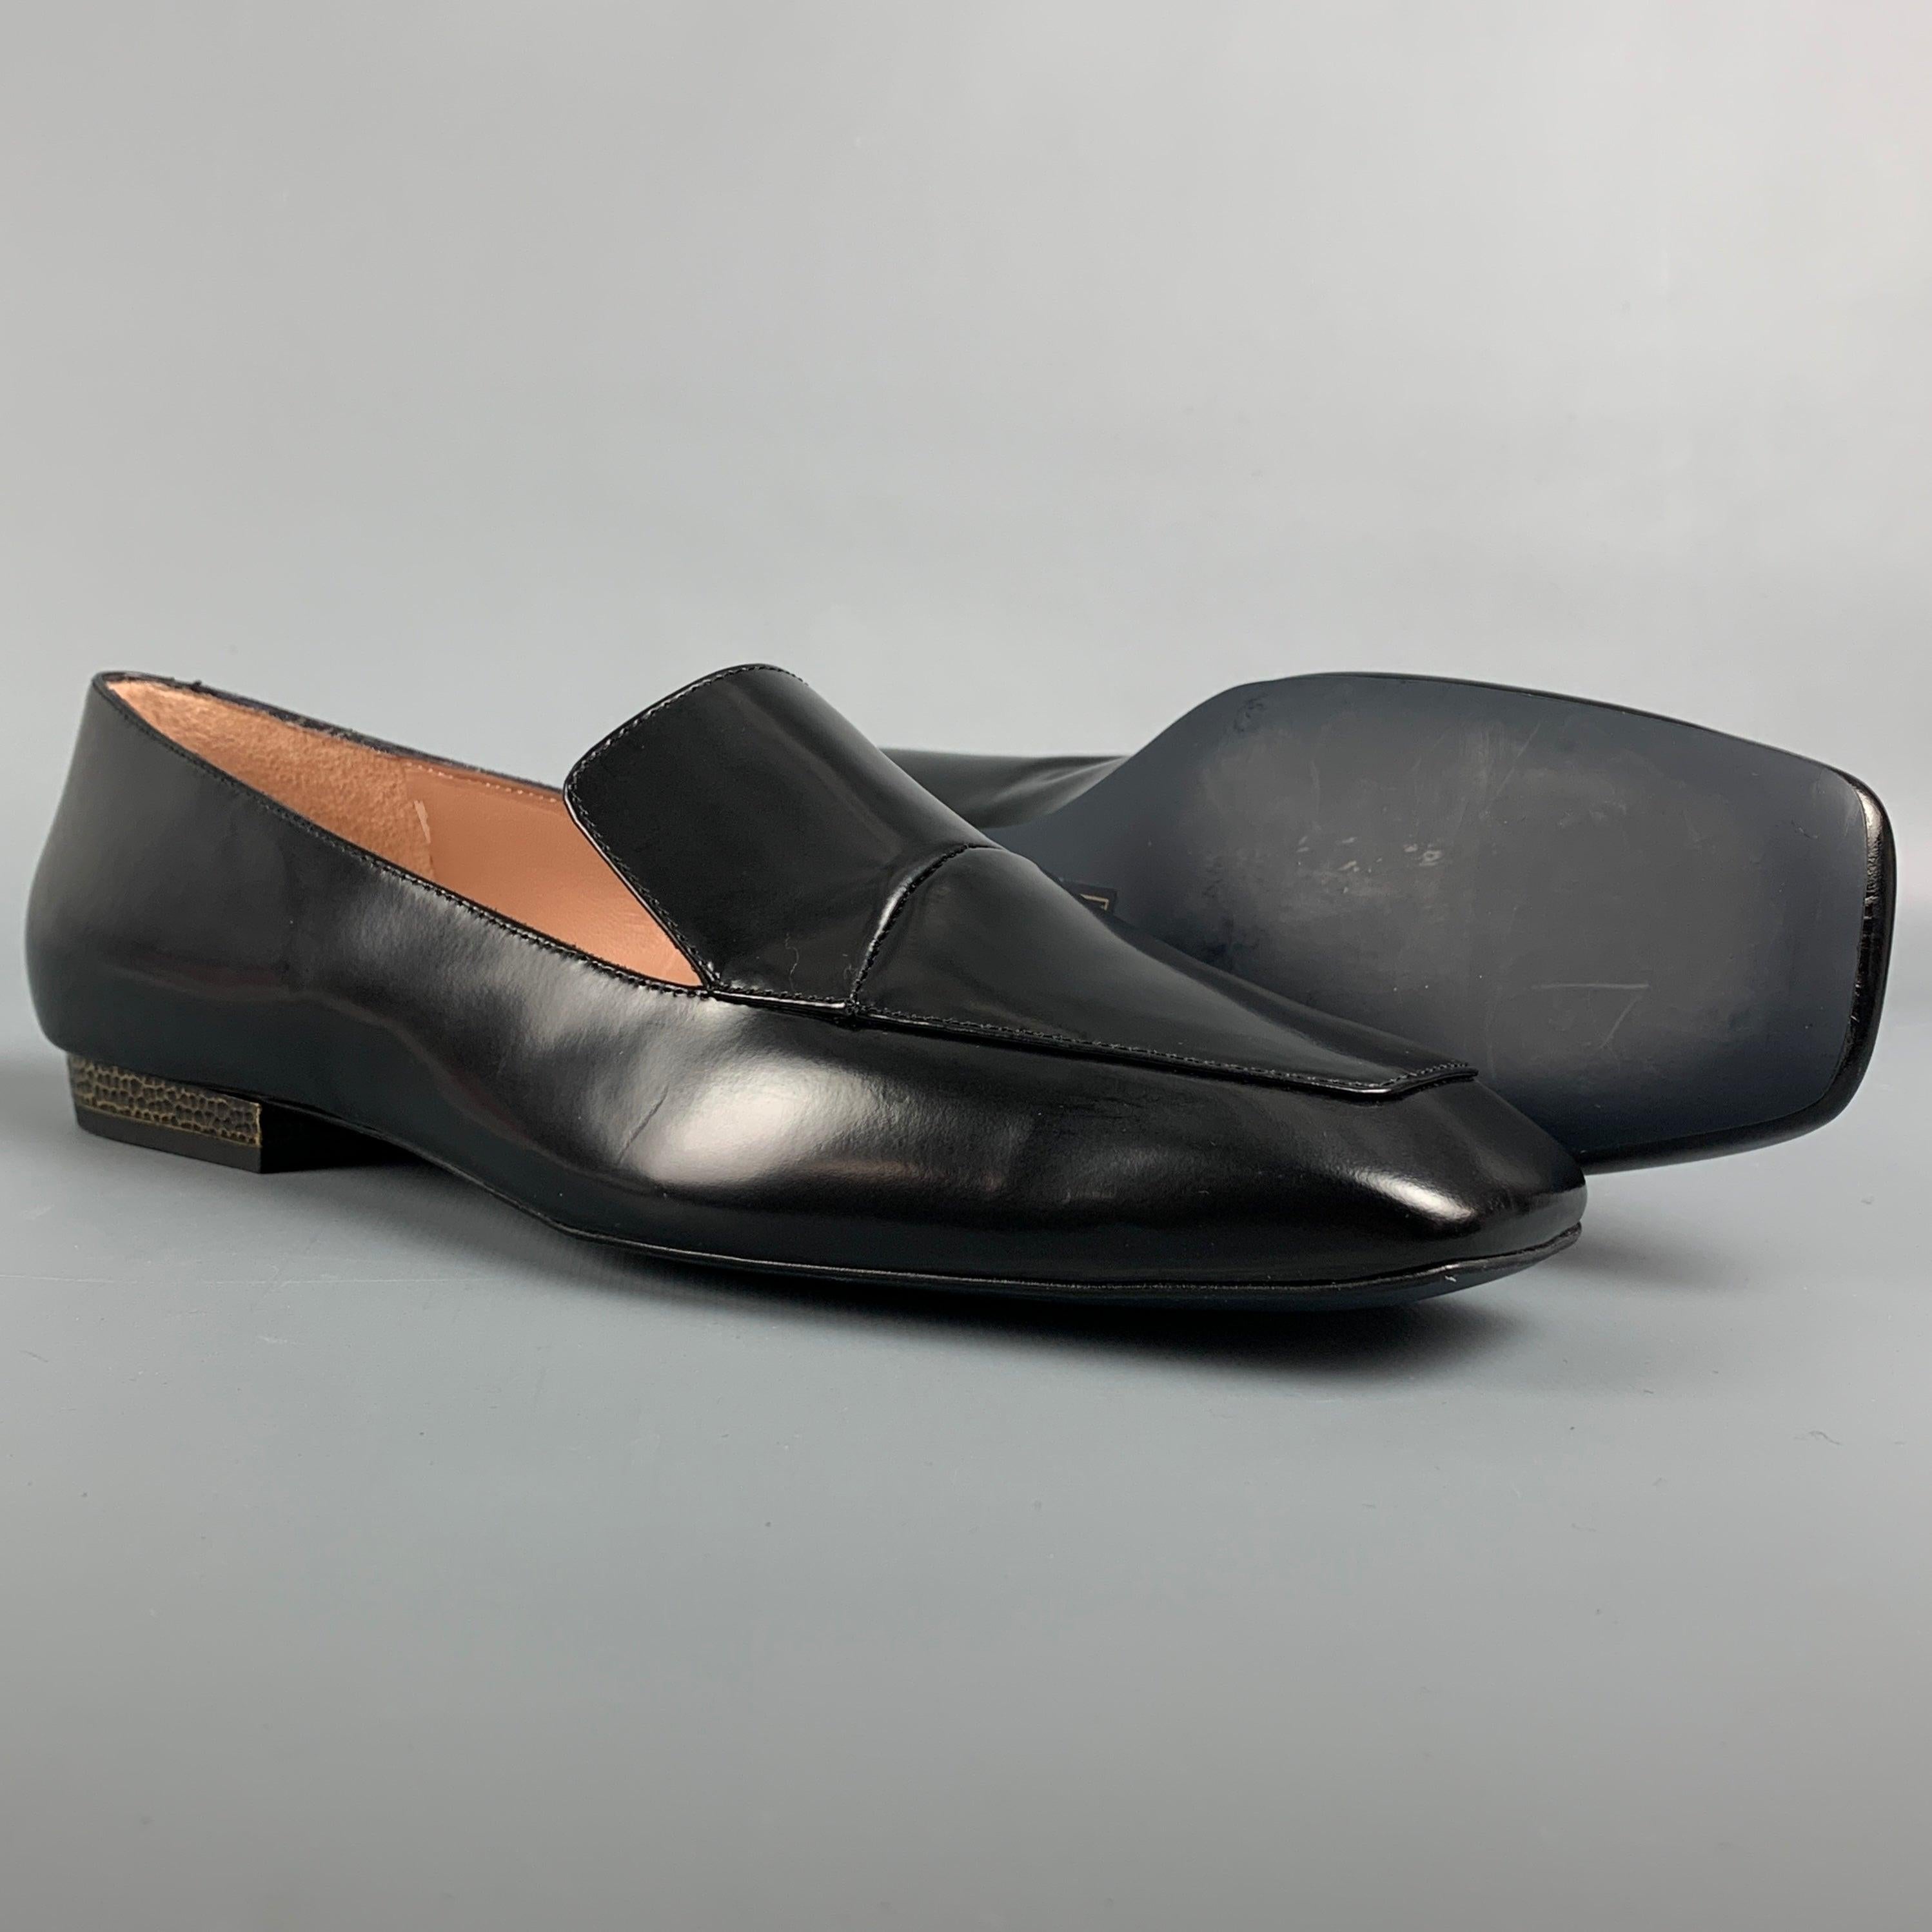 JIL SANDER Navy Size 8.5 Black Leather Square Toe Flats In Excellent Condition For Sale In San Francisco, CA